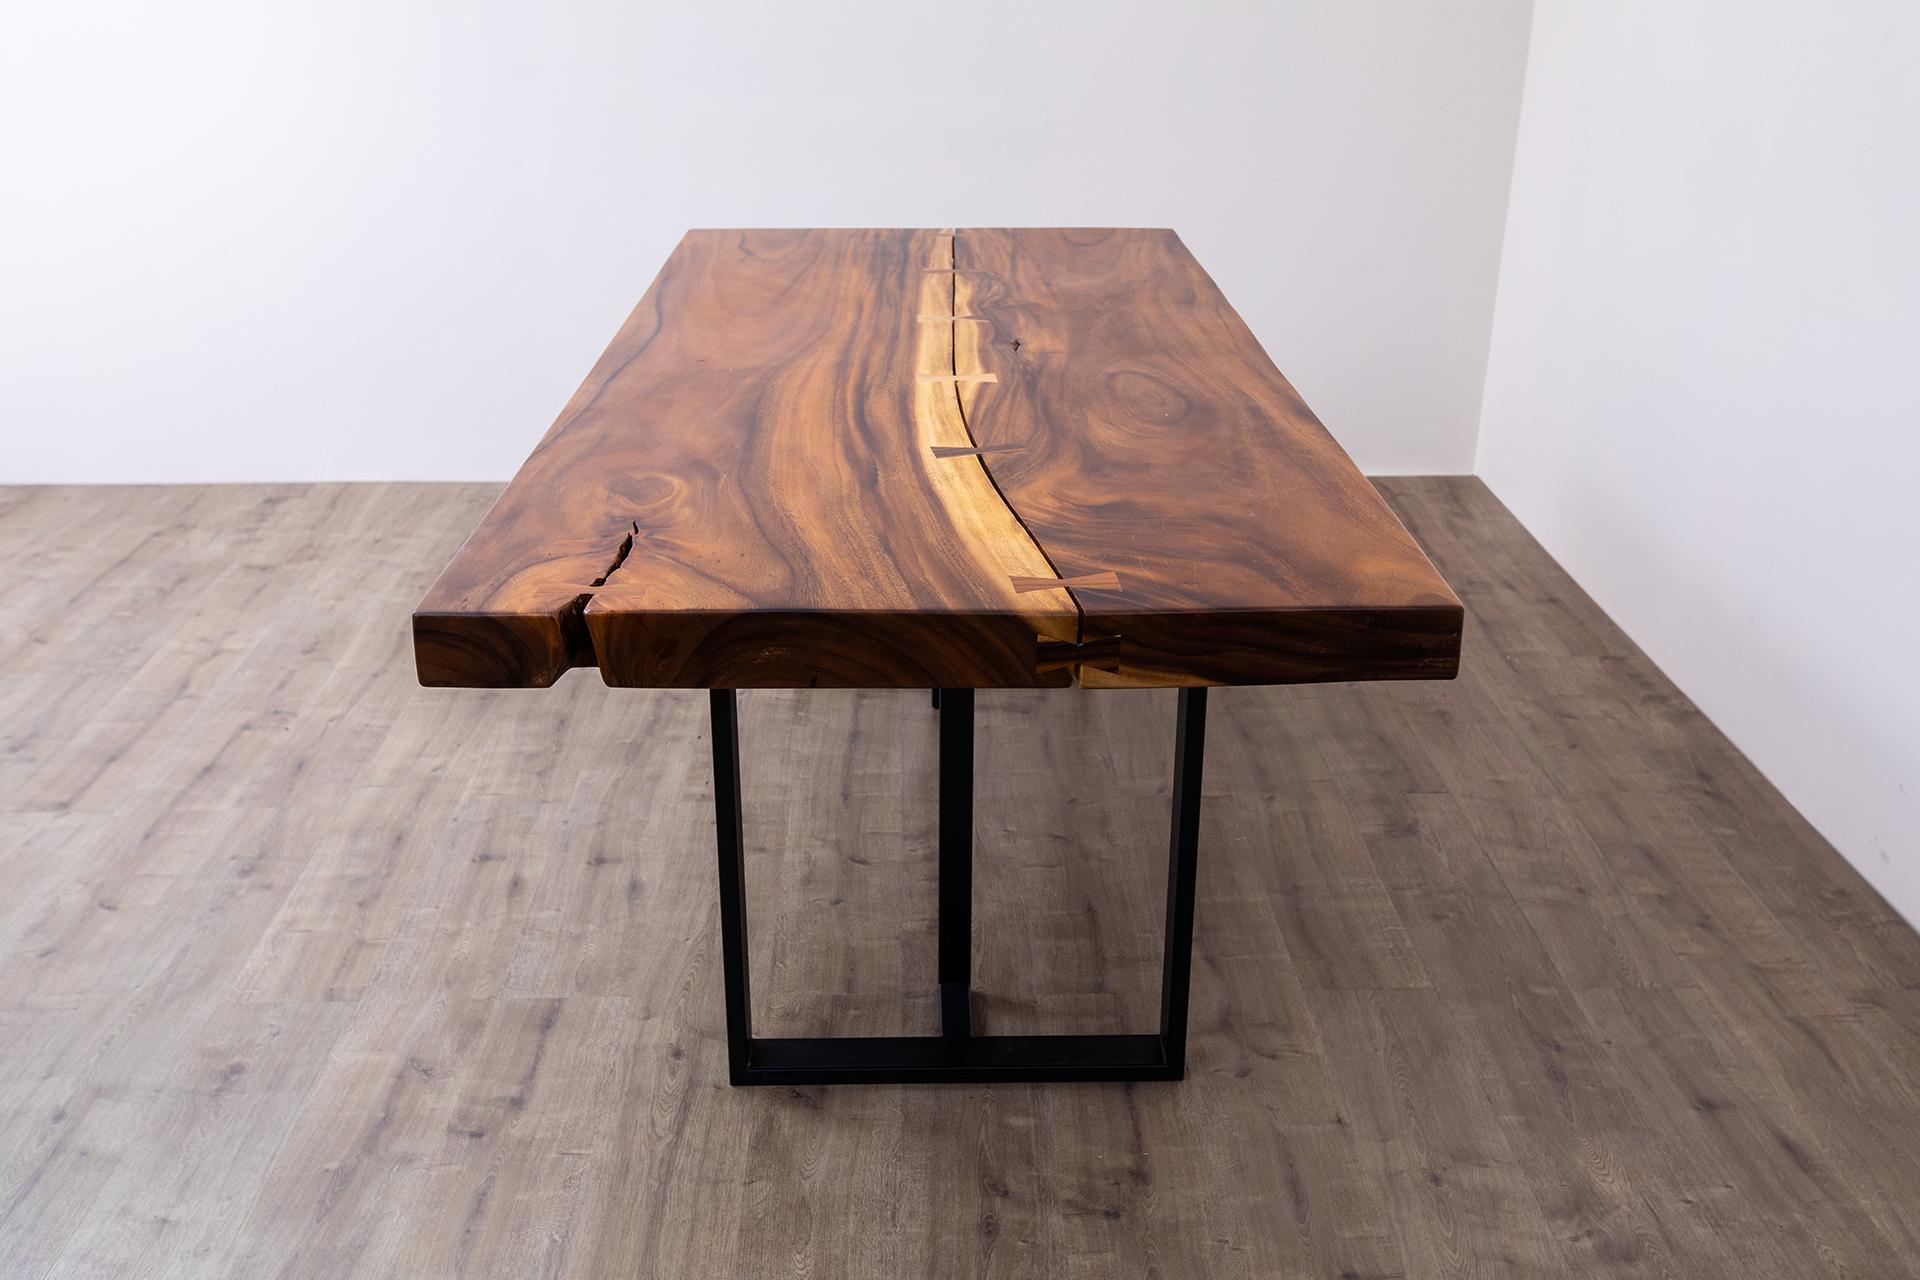 Discover the allure of our one-of-a-kind solid acacia dining/conference table, a true statement piece for your dining area. Handcrafted with care and attention to detail, this table showcases the natural beauty and uniqueness of solid acacia